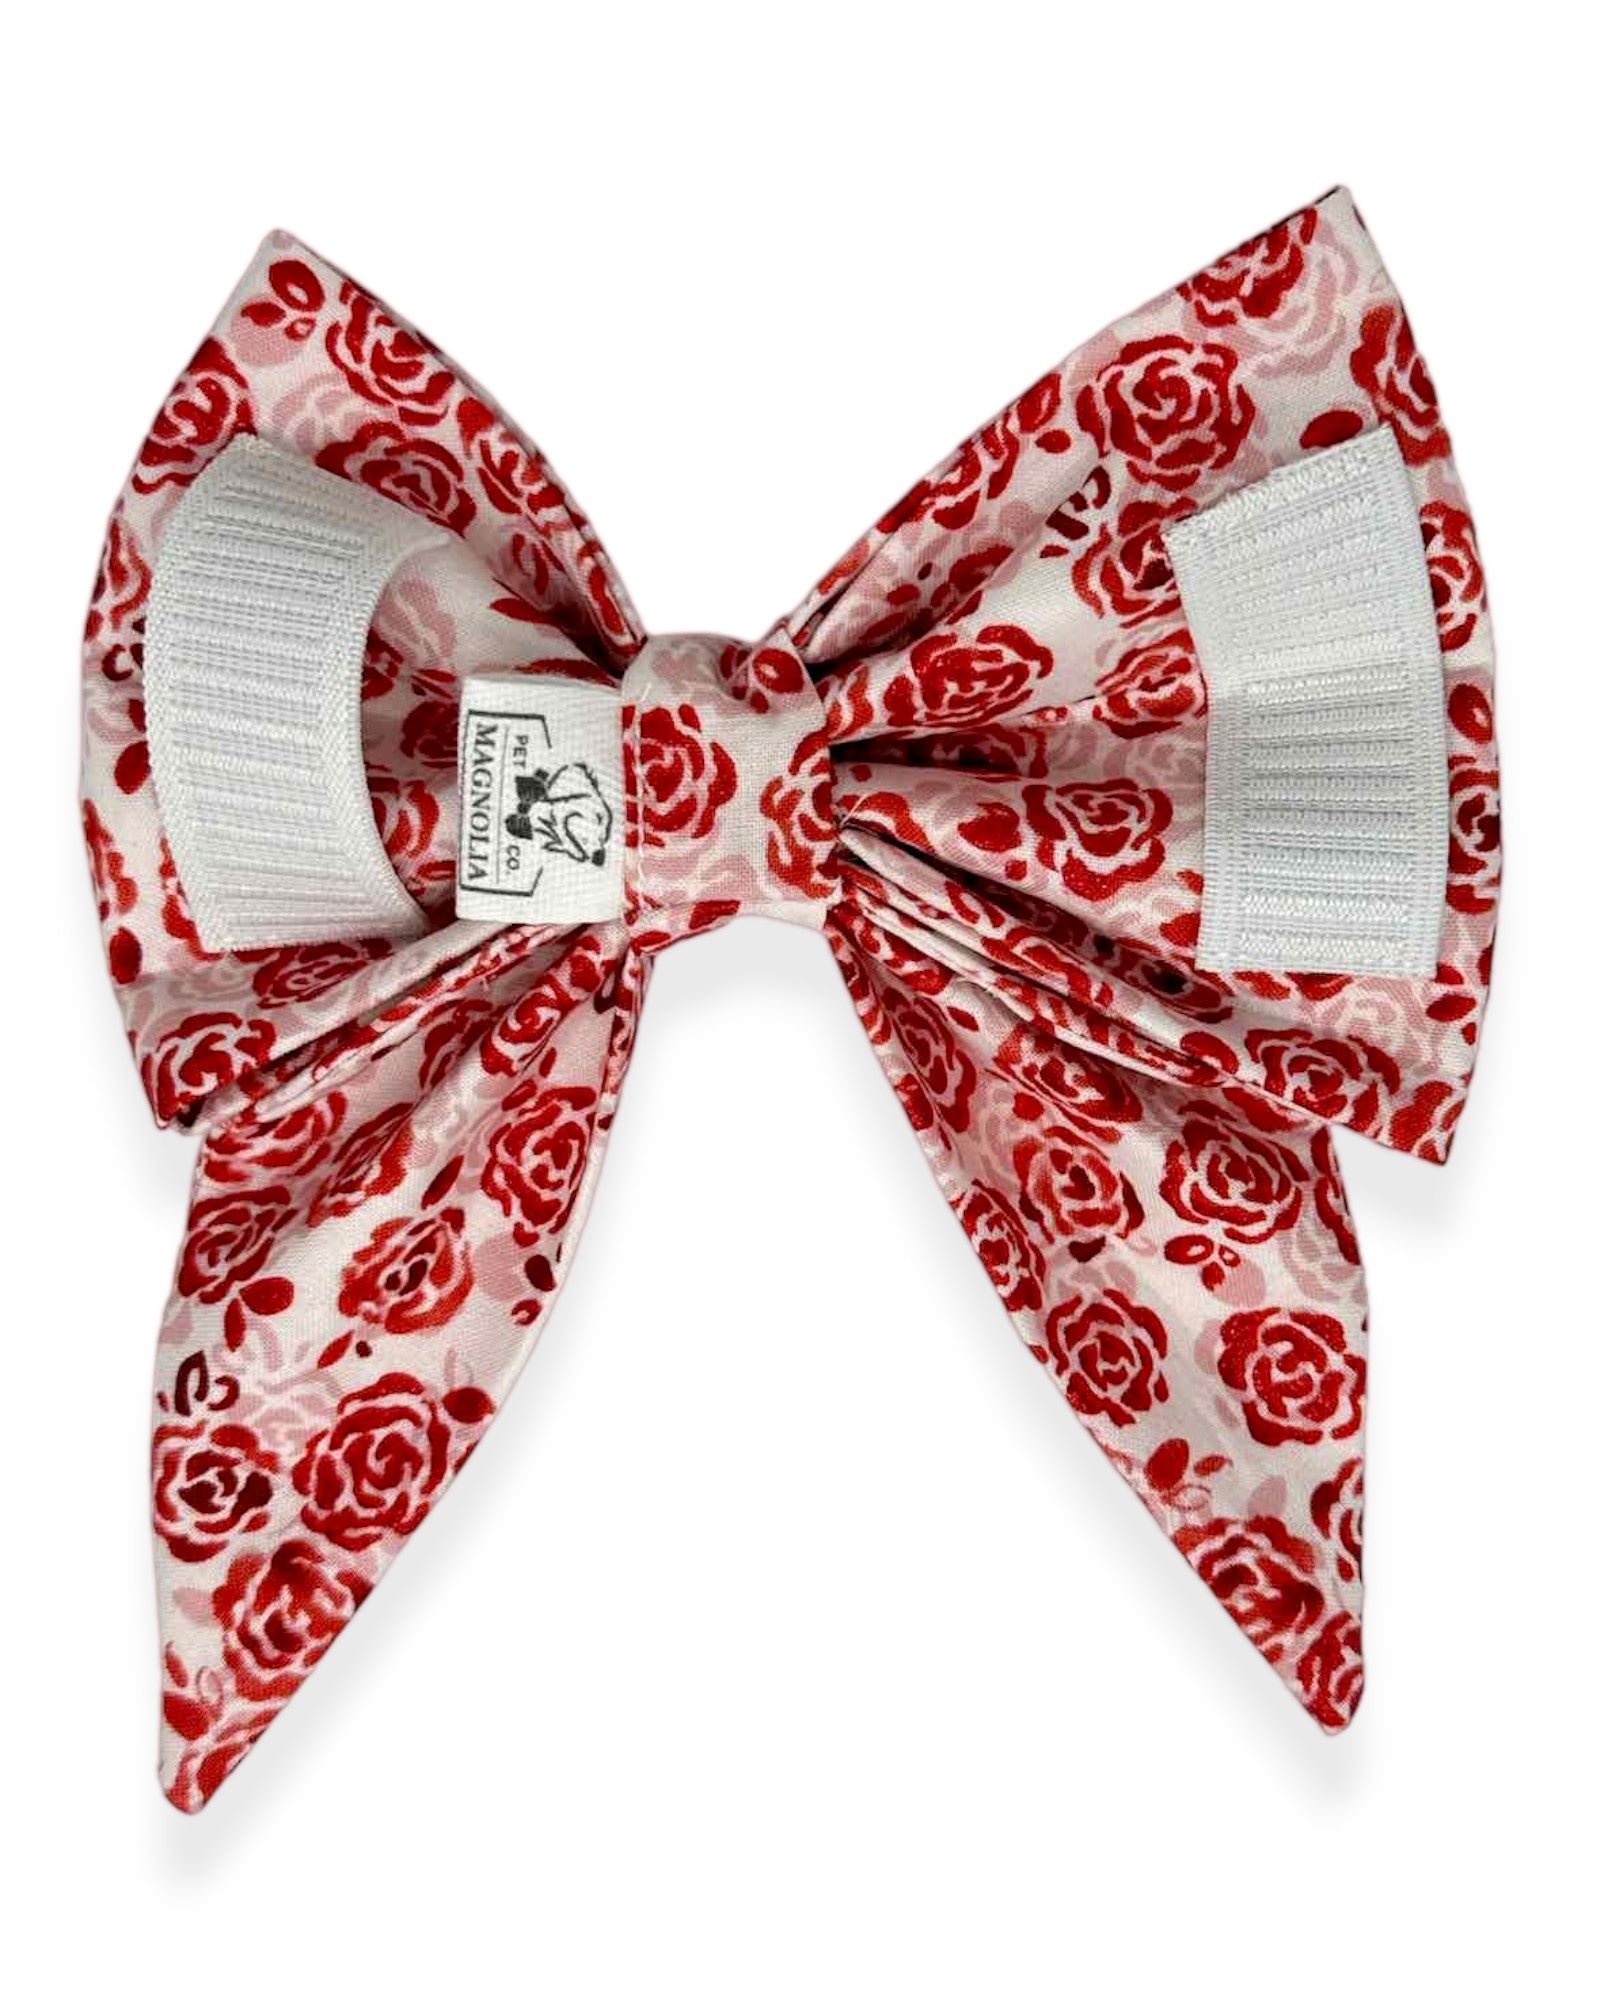 Red Rose Calico Dog Bow with Sparkles, Back with Dual Elastic Straps